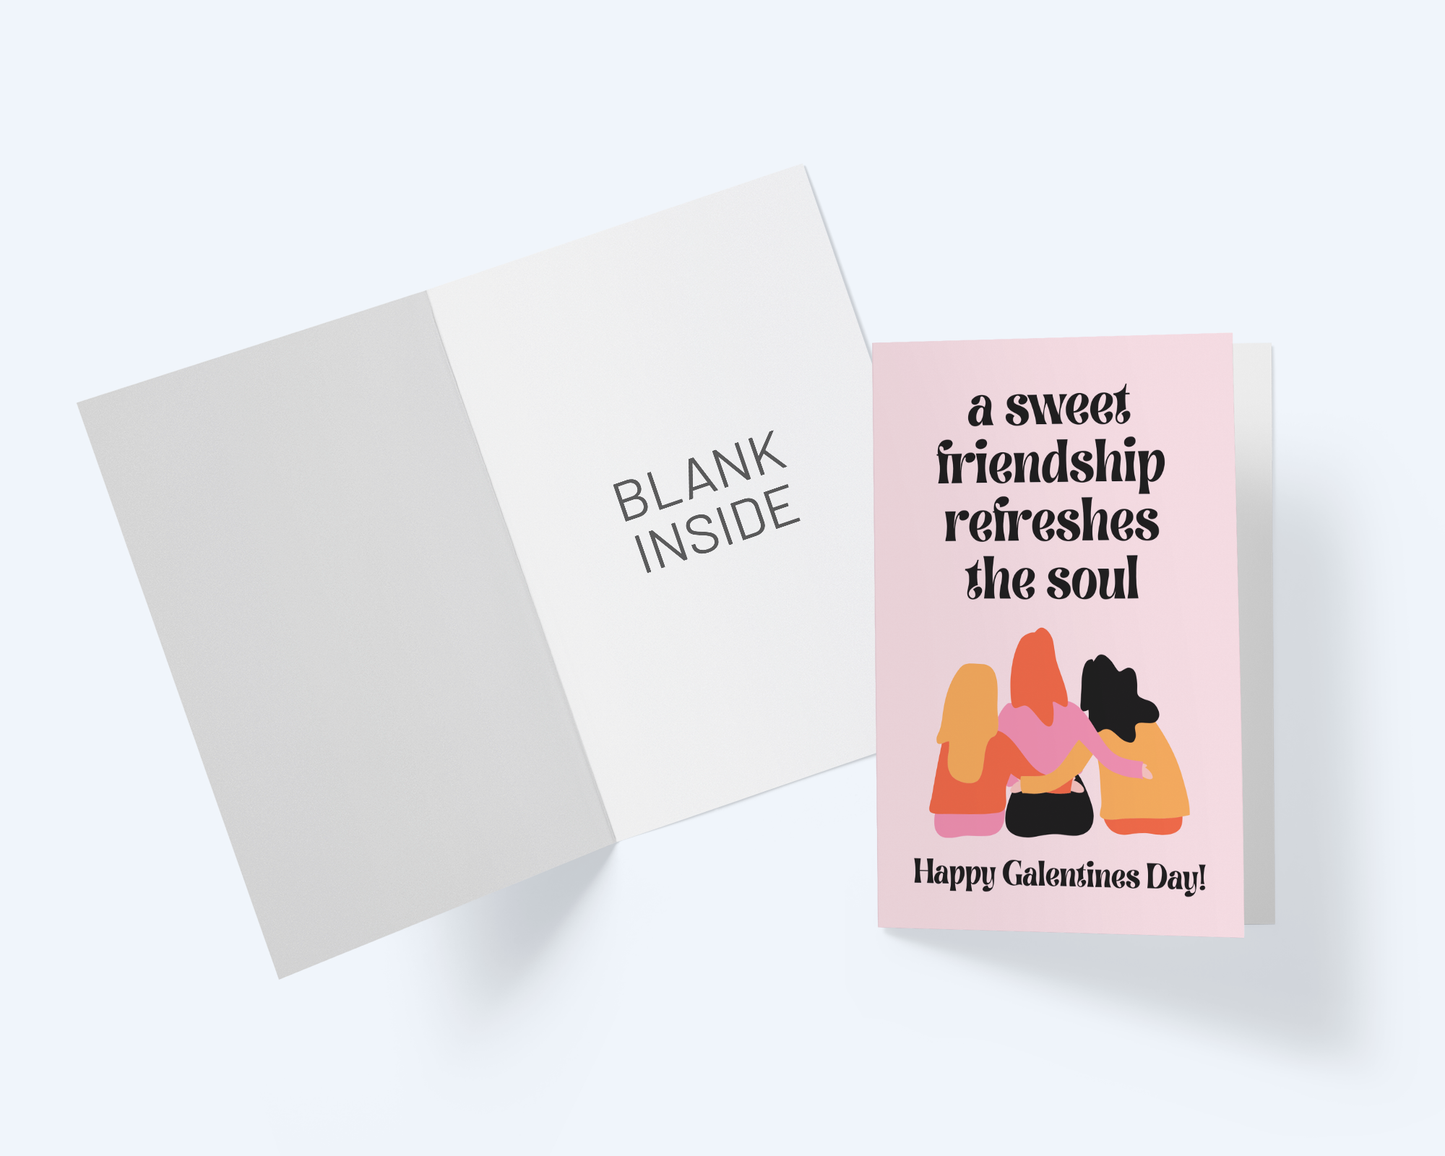 Happy Galentine's Day Greeting Card: A Sweet Friendship Refreshes the Soul.